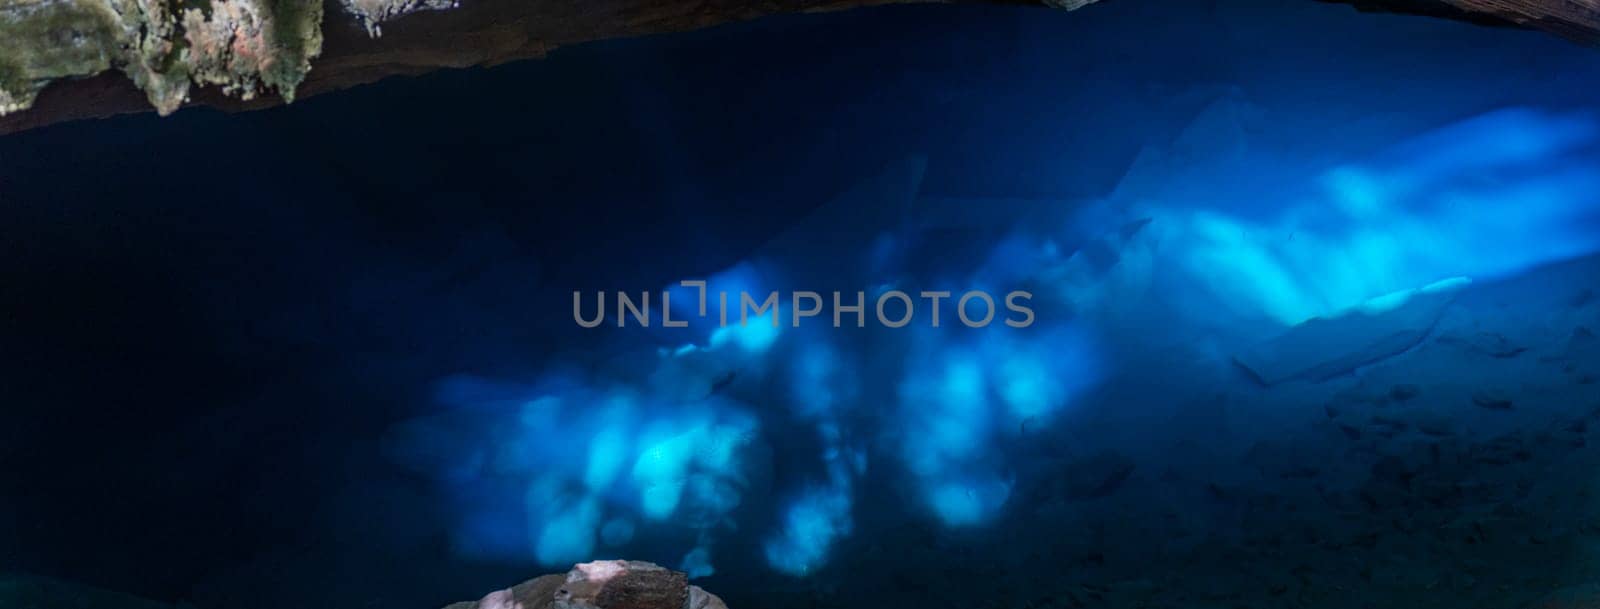 Mysterious Underwater Cave with Natural Blue Light by FerradalFCG